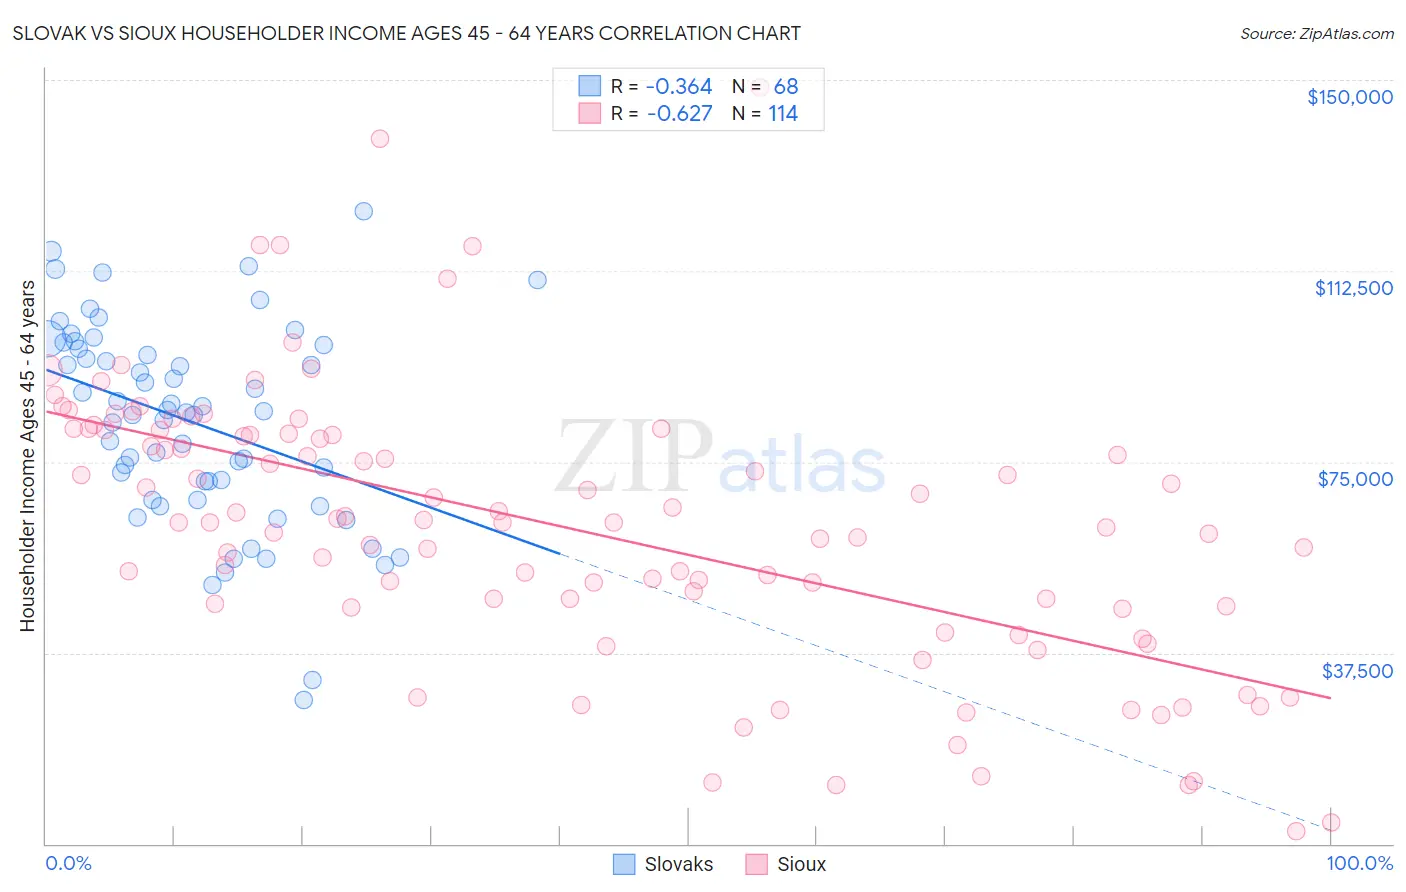 Slovak vs Sioux Householder Income Ages 45 - 64 years